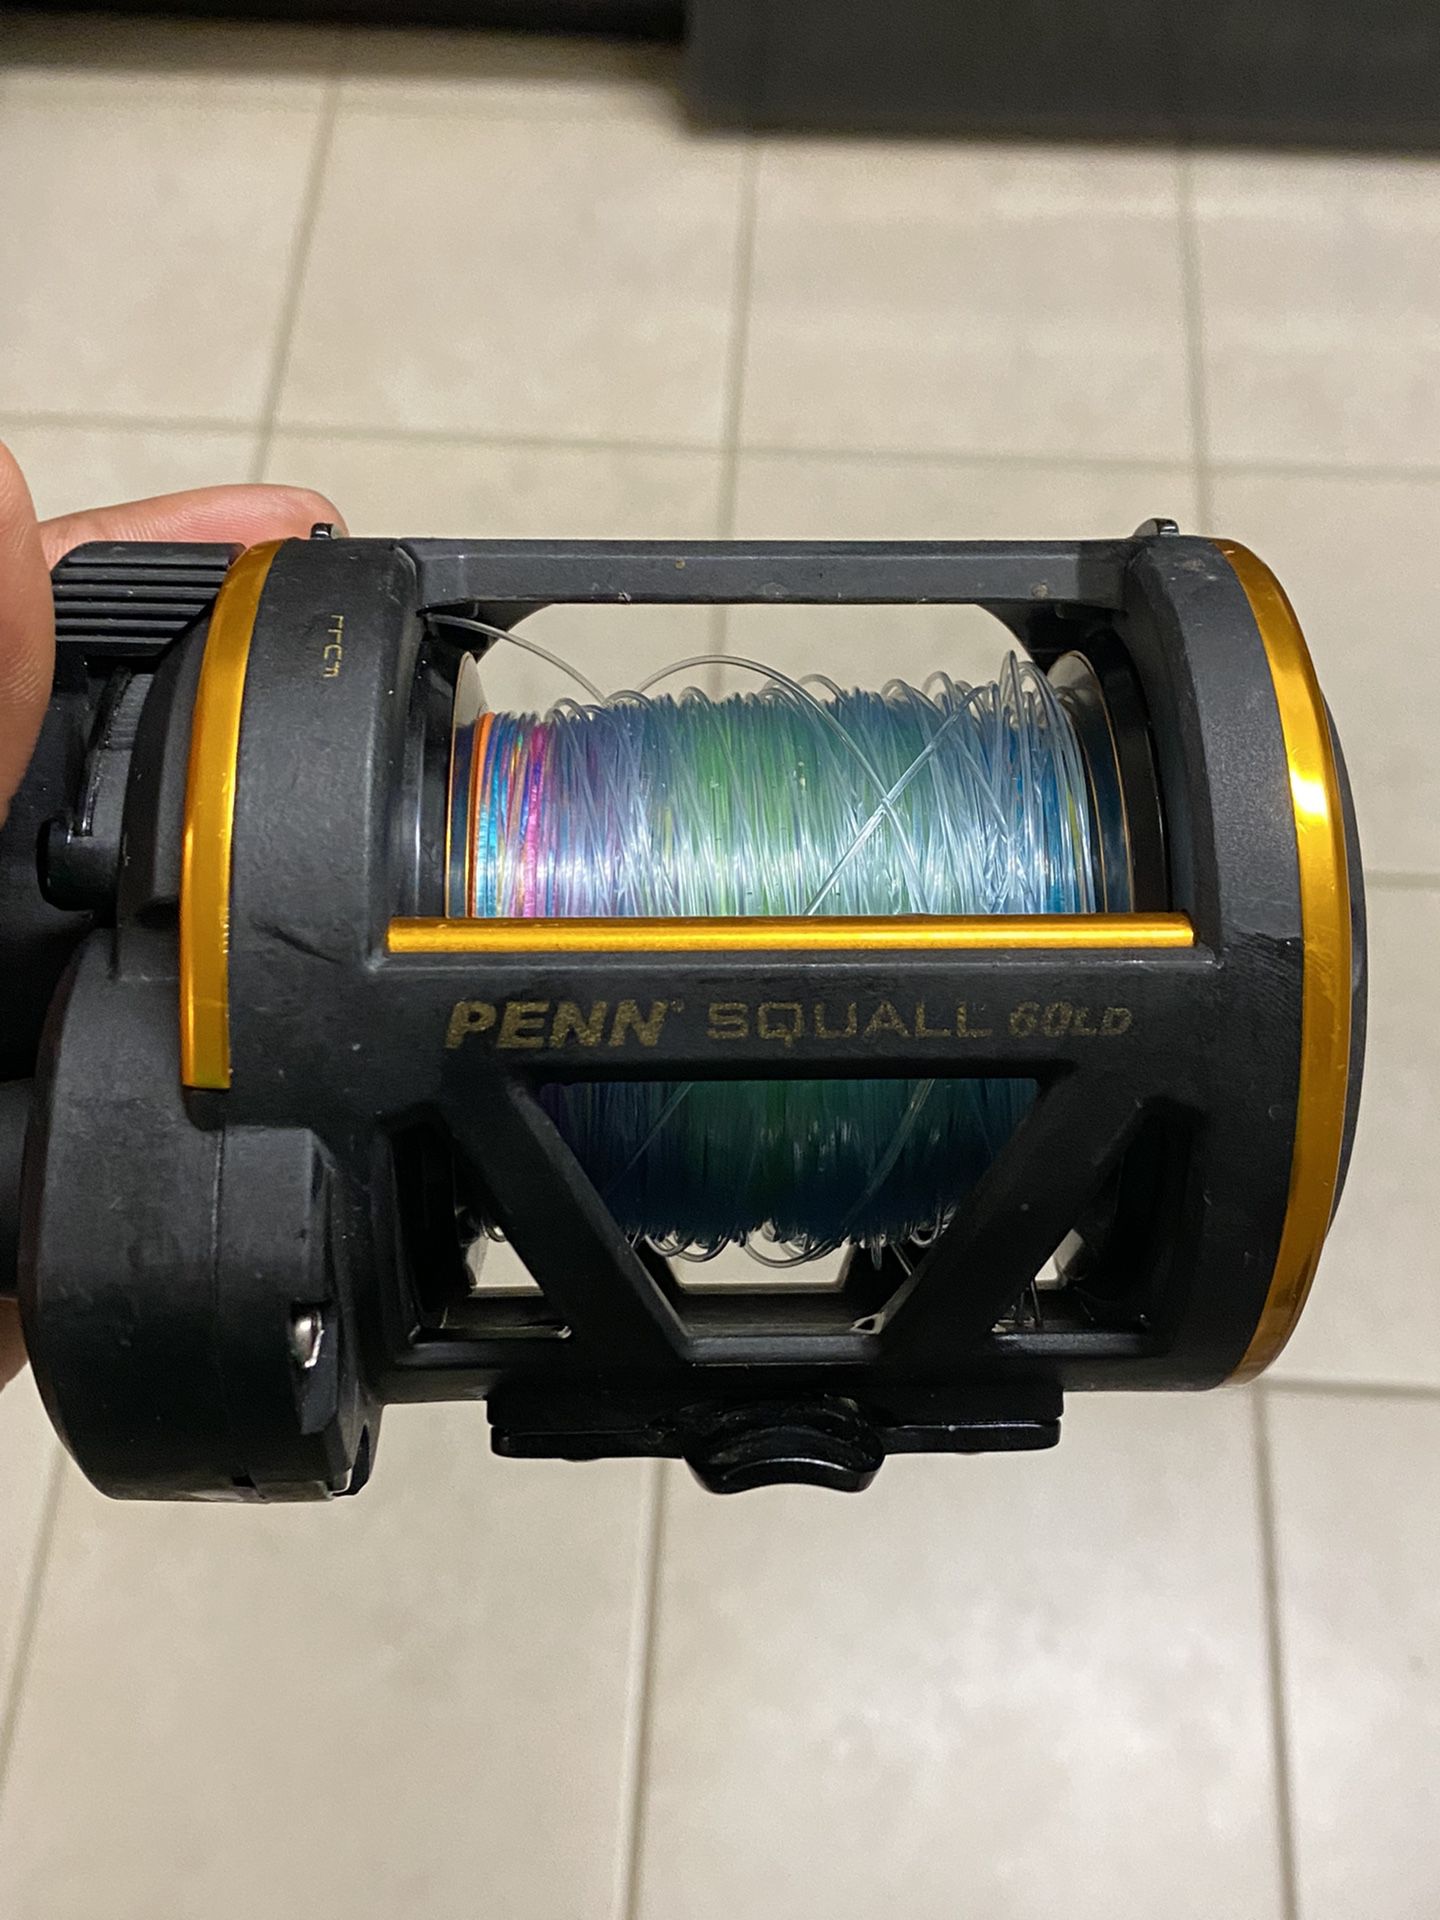 Penn Squall 60LD Squall Lever Drag Reel for Sale in Lake Worth, FL